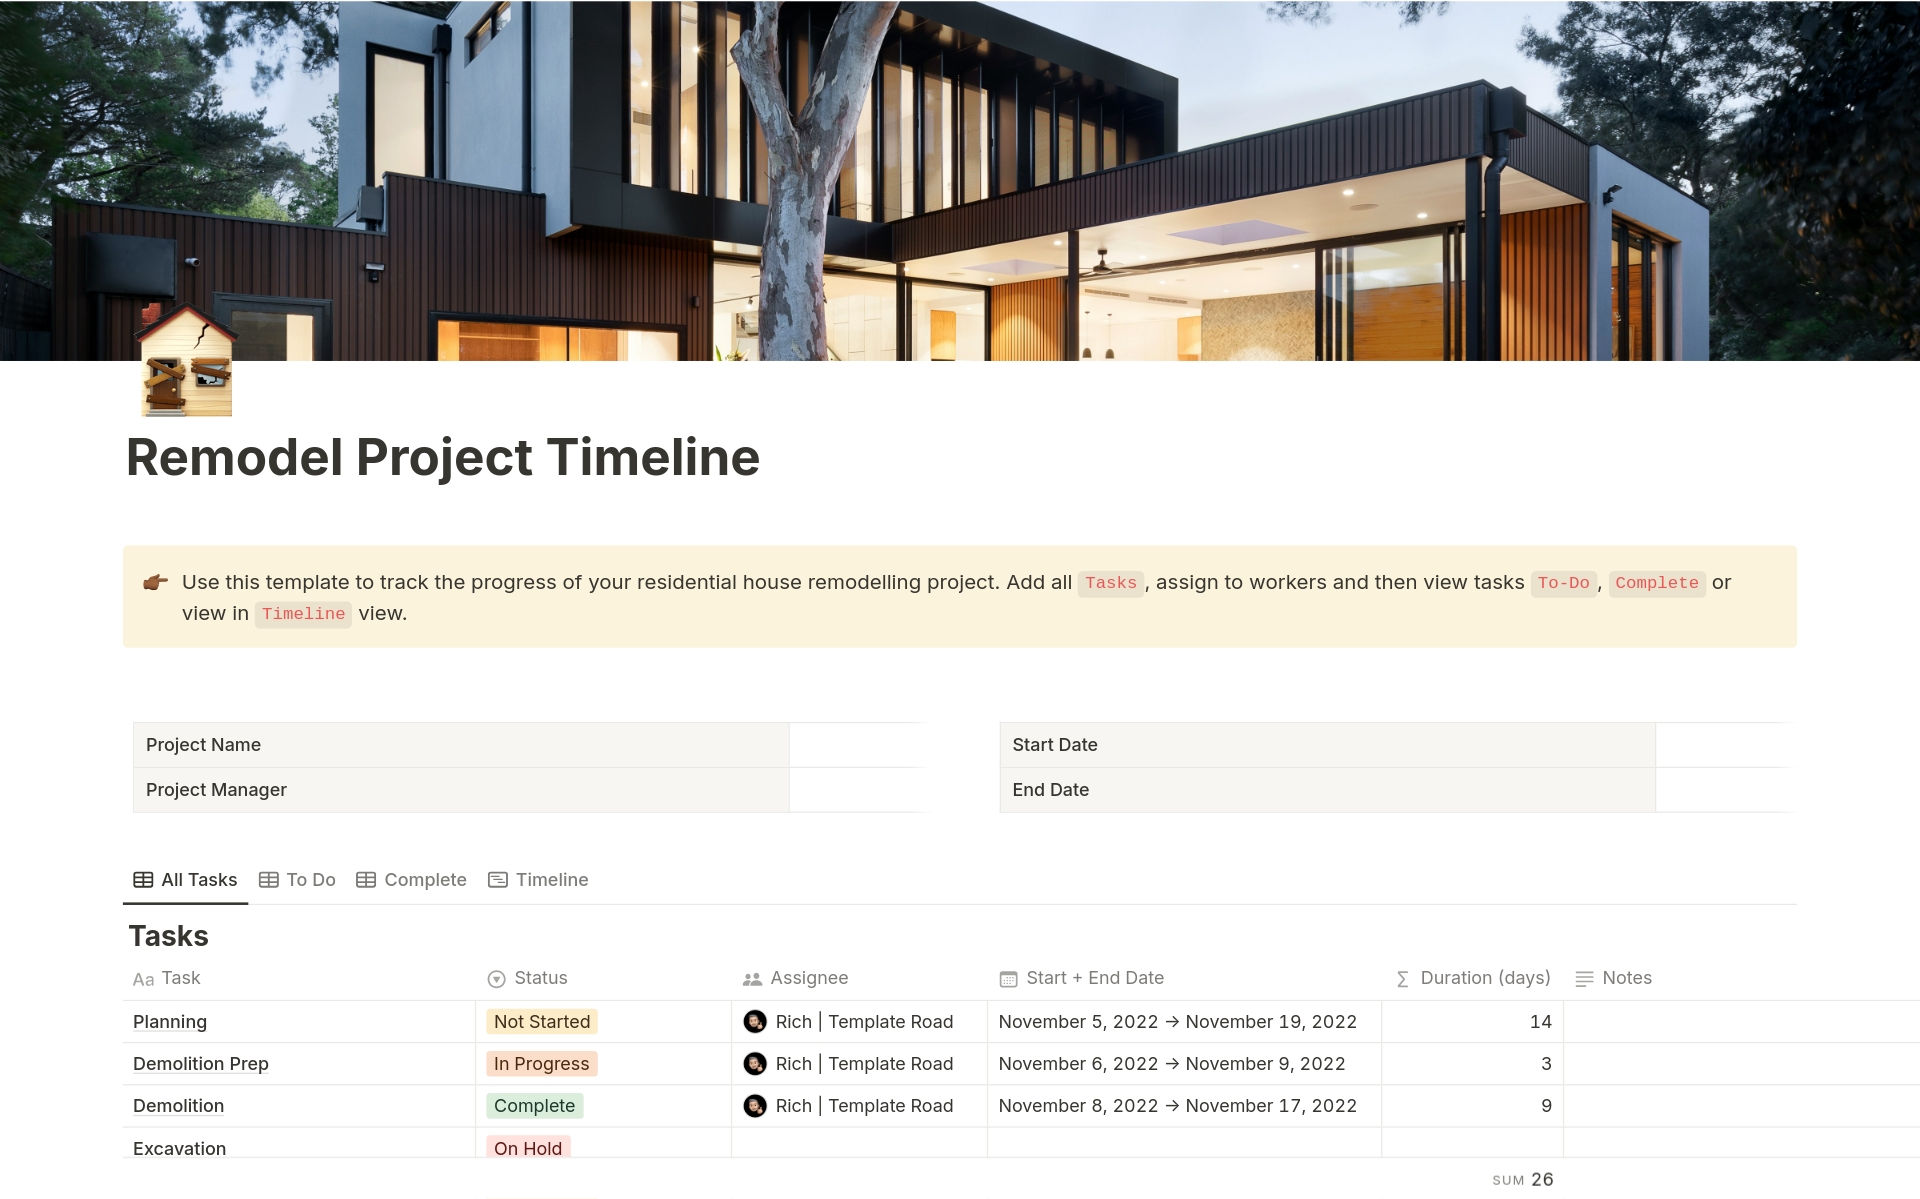 Use this template to track the progress of your residential house remodelling project in Notion.